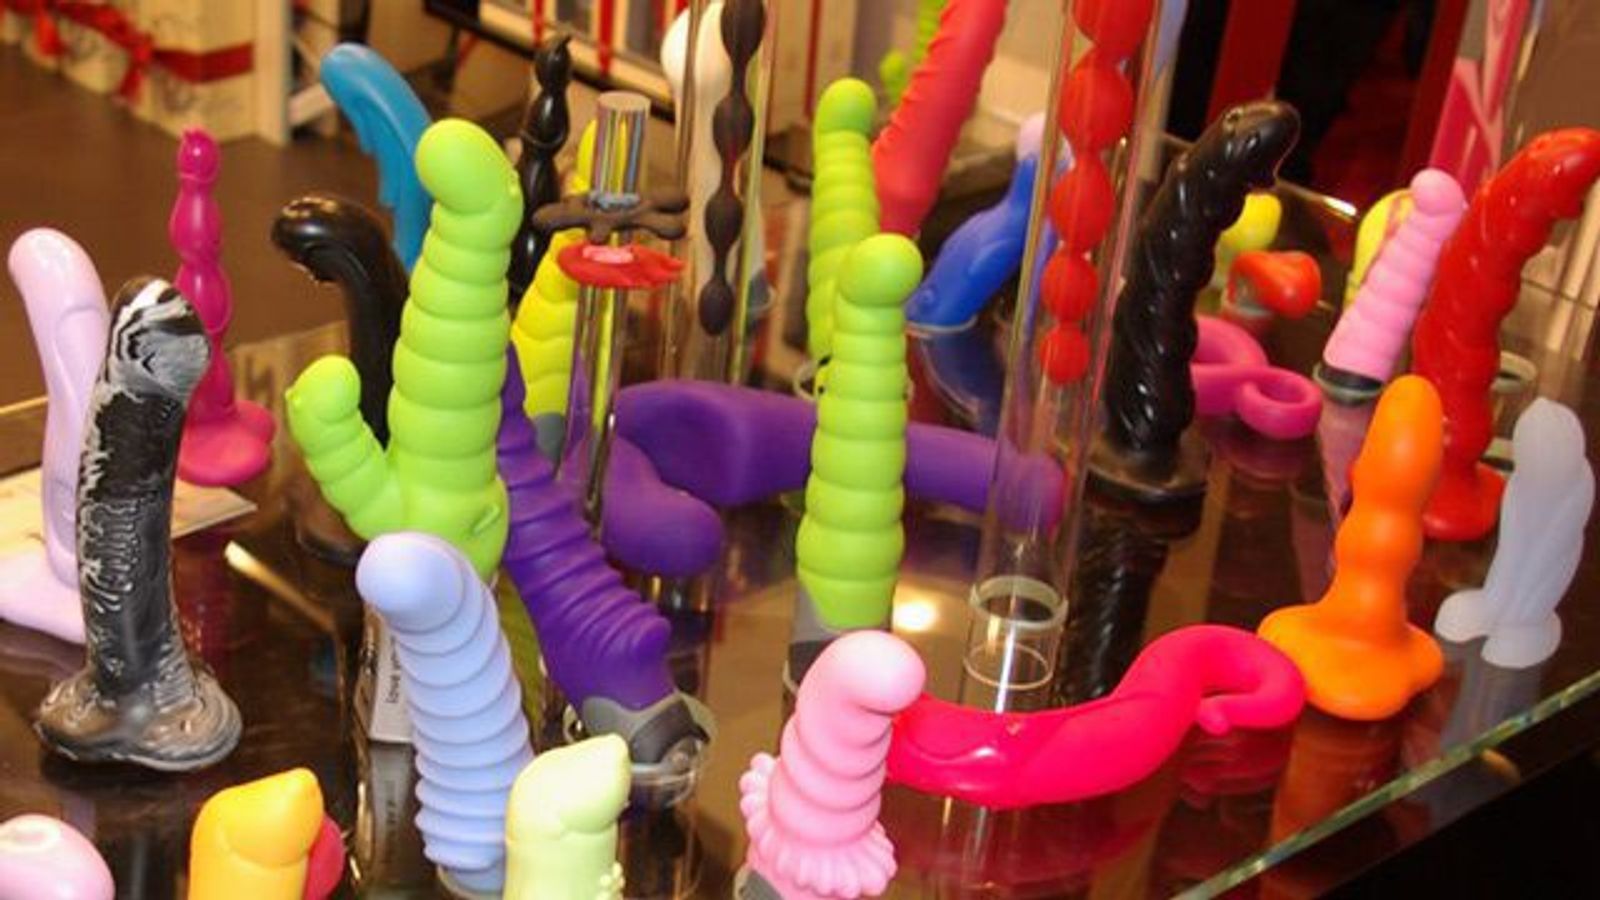 Roman Catholics Target of Explosive Sex Toys From Spanish Anarchists